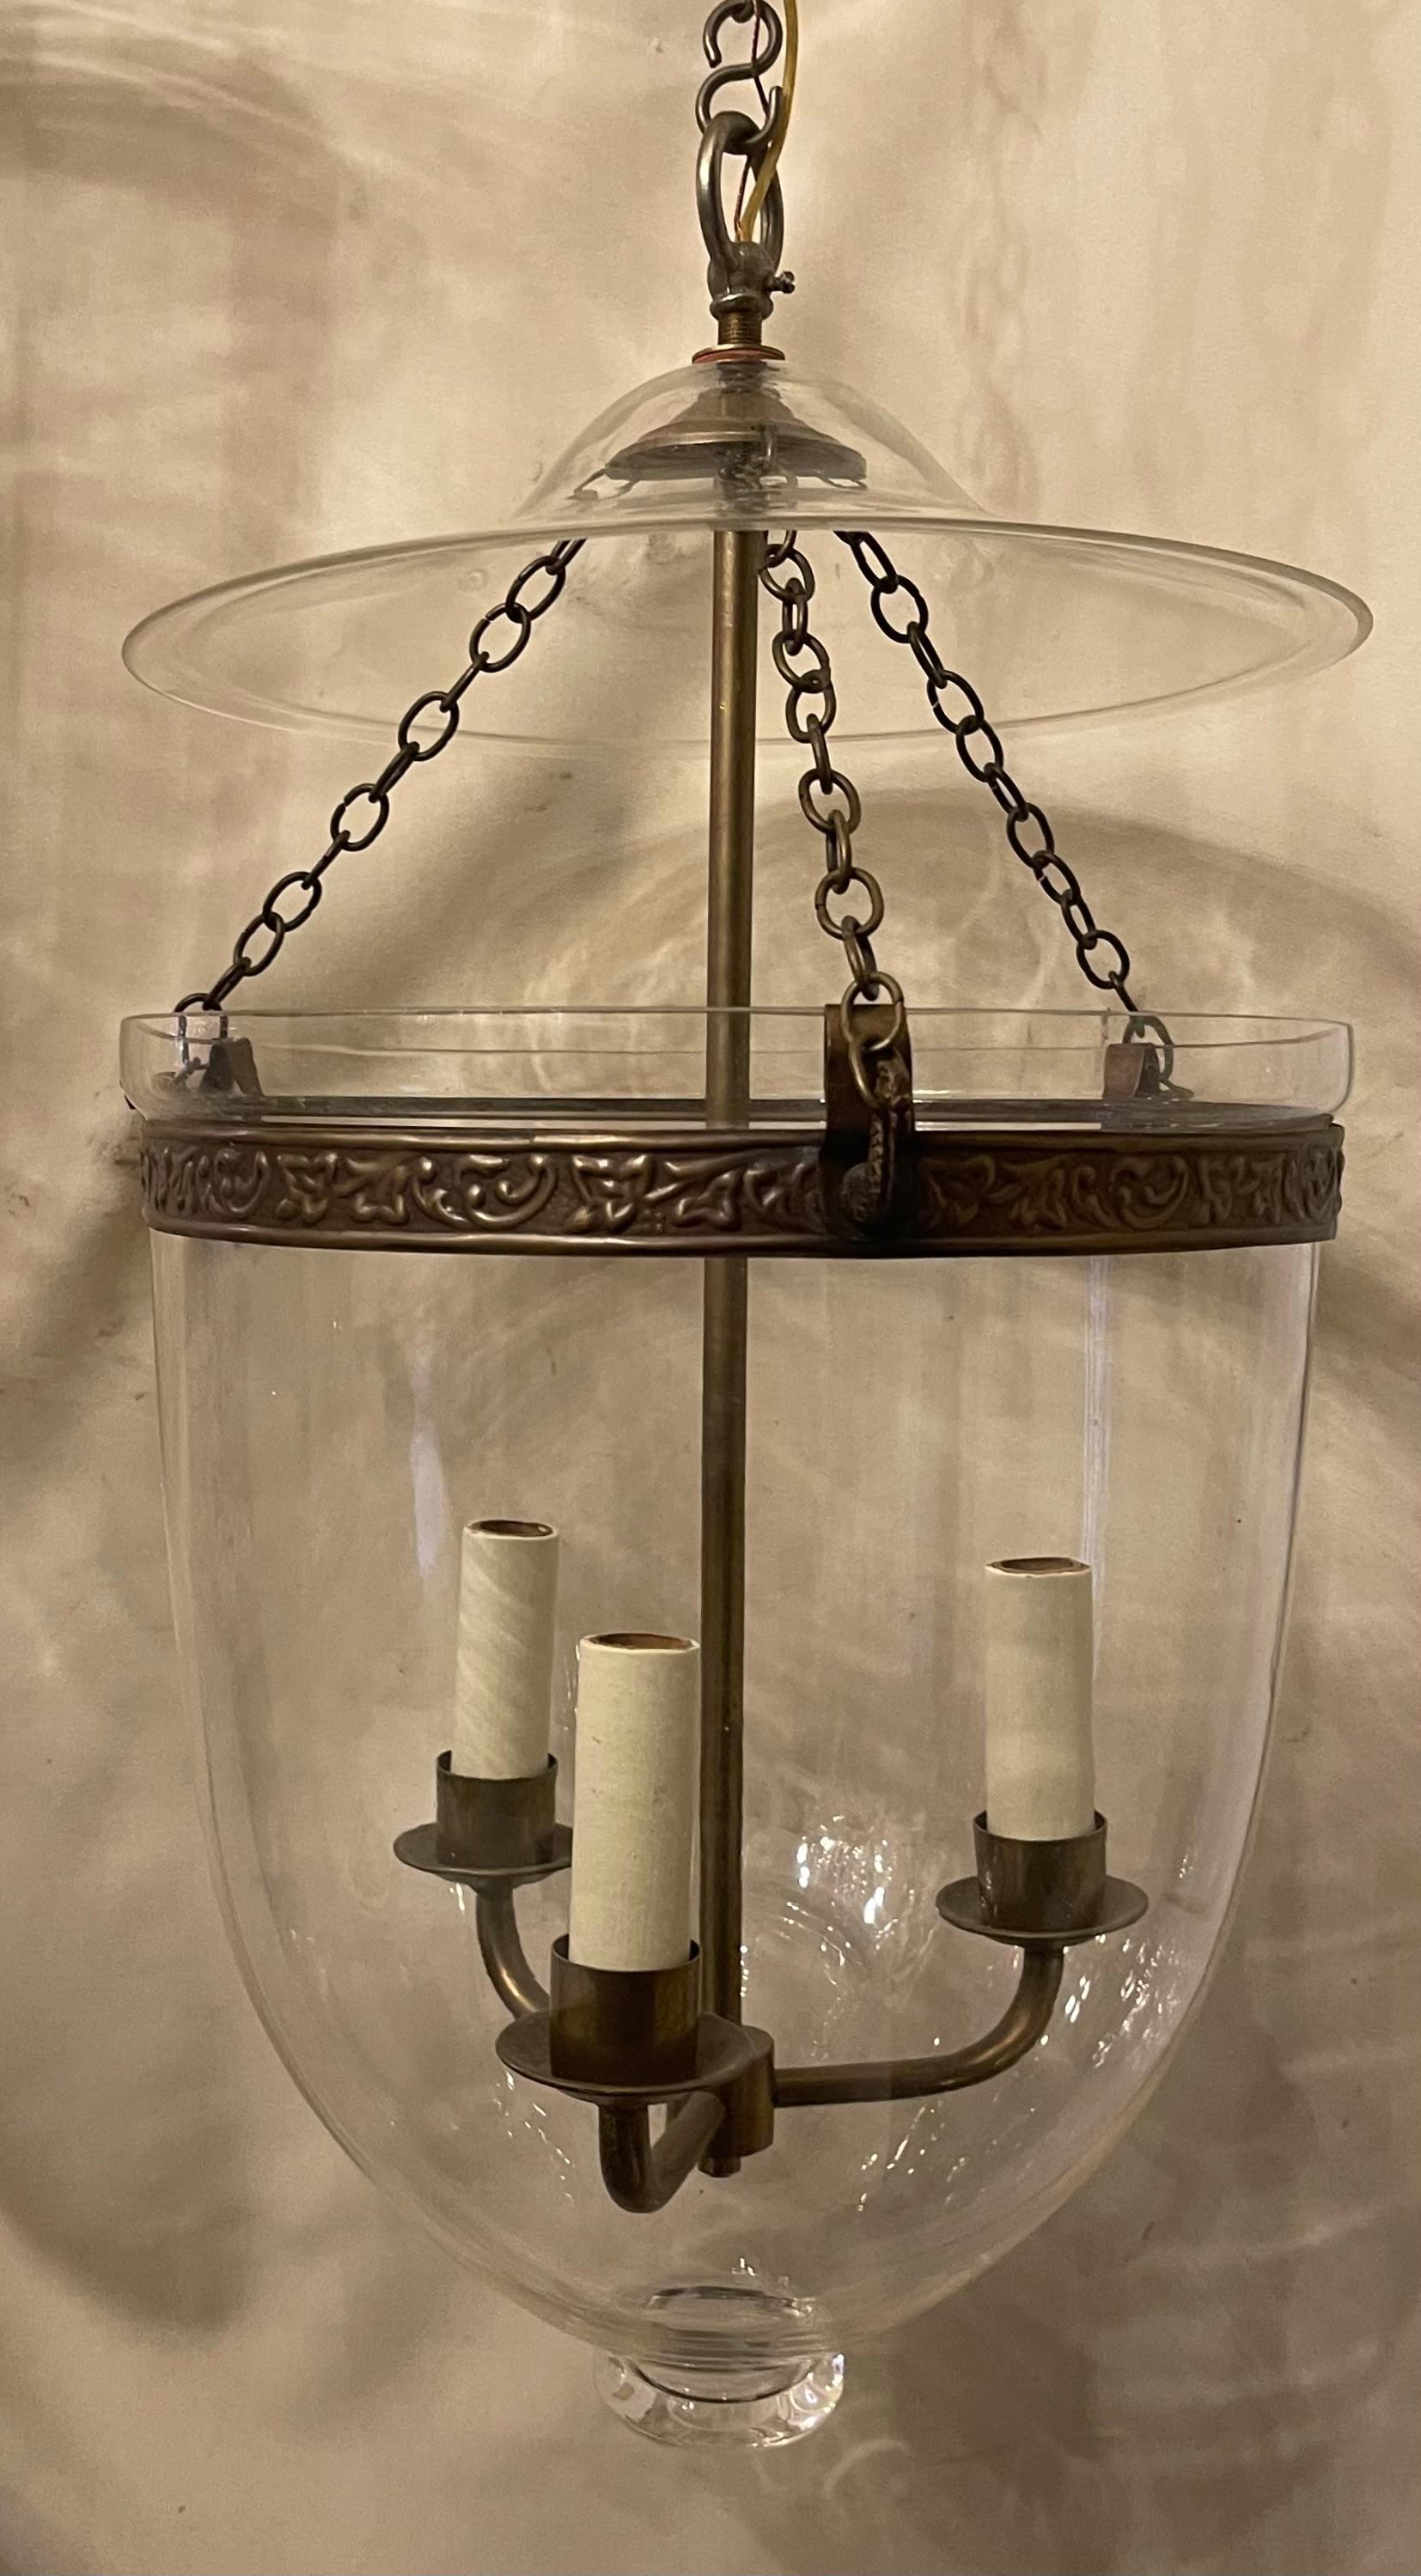 A fine pair of English regency style brass / bronze bell jar blown glass lantern fixtures by Vaughan Designs

Each sold separately
Pair is available.